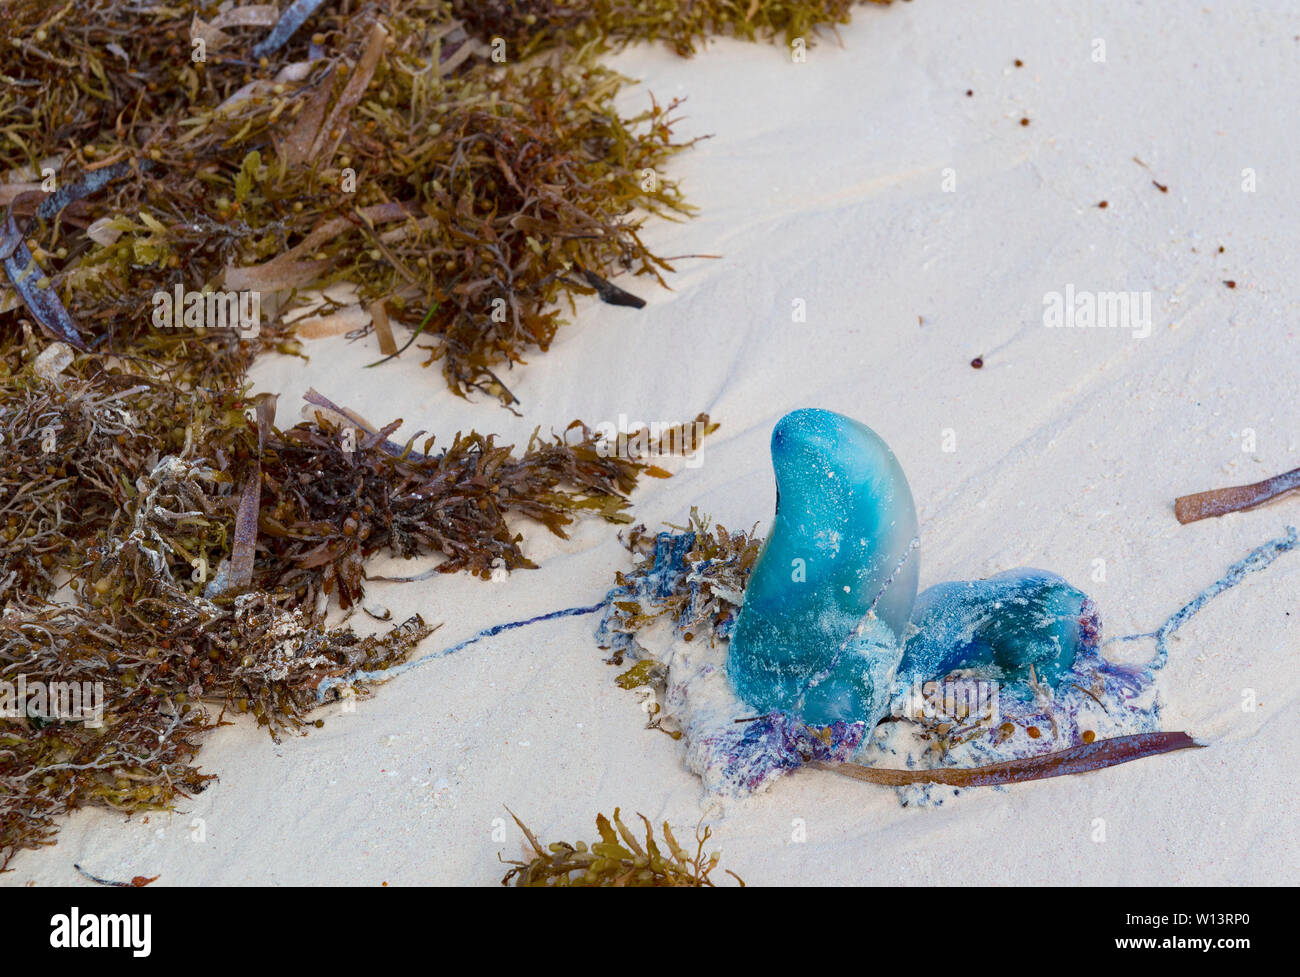 Portuguese man of war (Physalia Physalis) washed up on beach on Cayo Levisa, Cuba, Caribbean showing its gas-filled bladder or pneumatophore Stock Photo